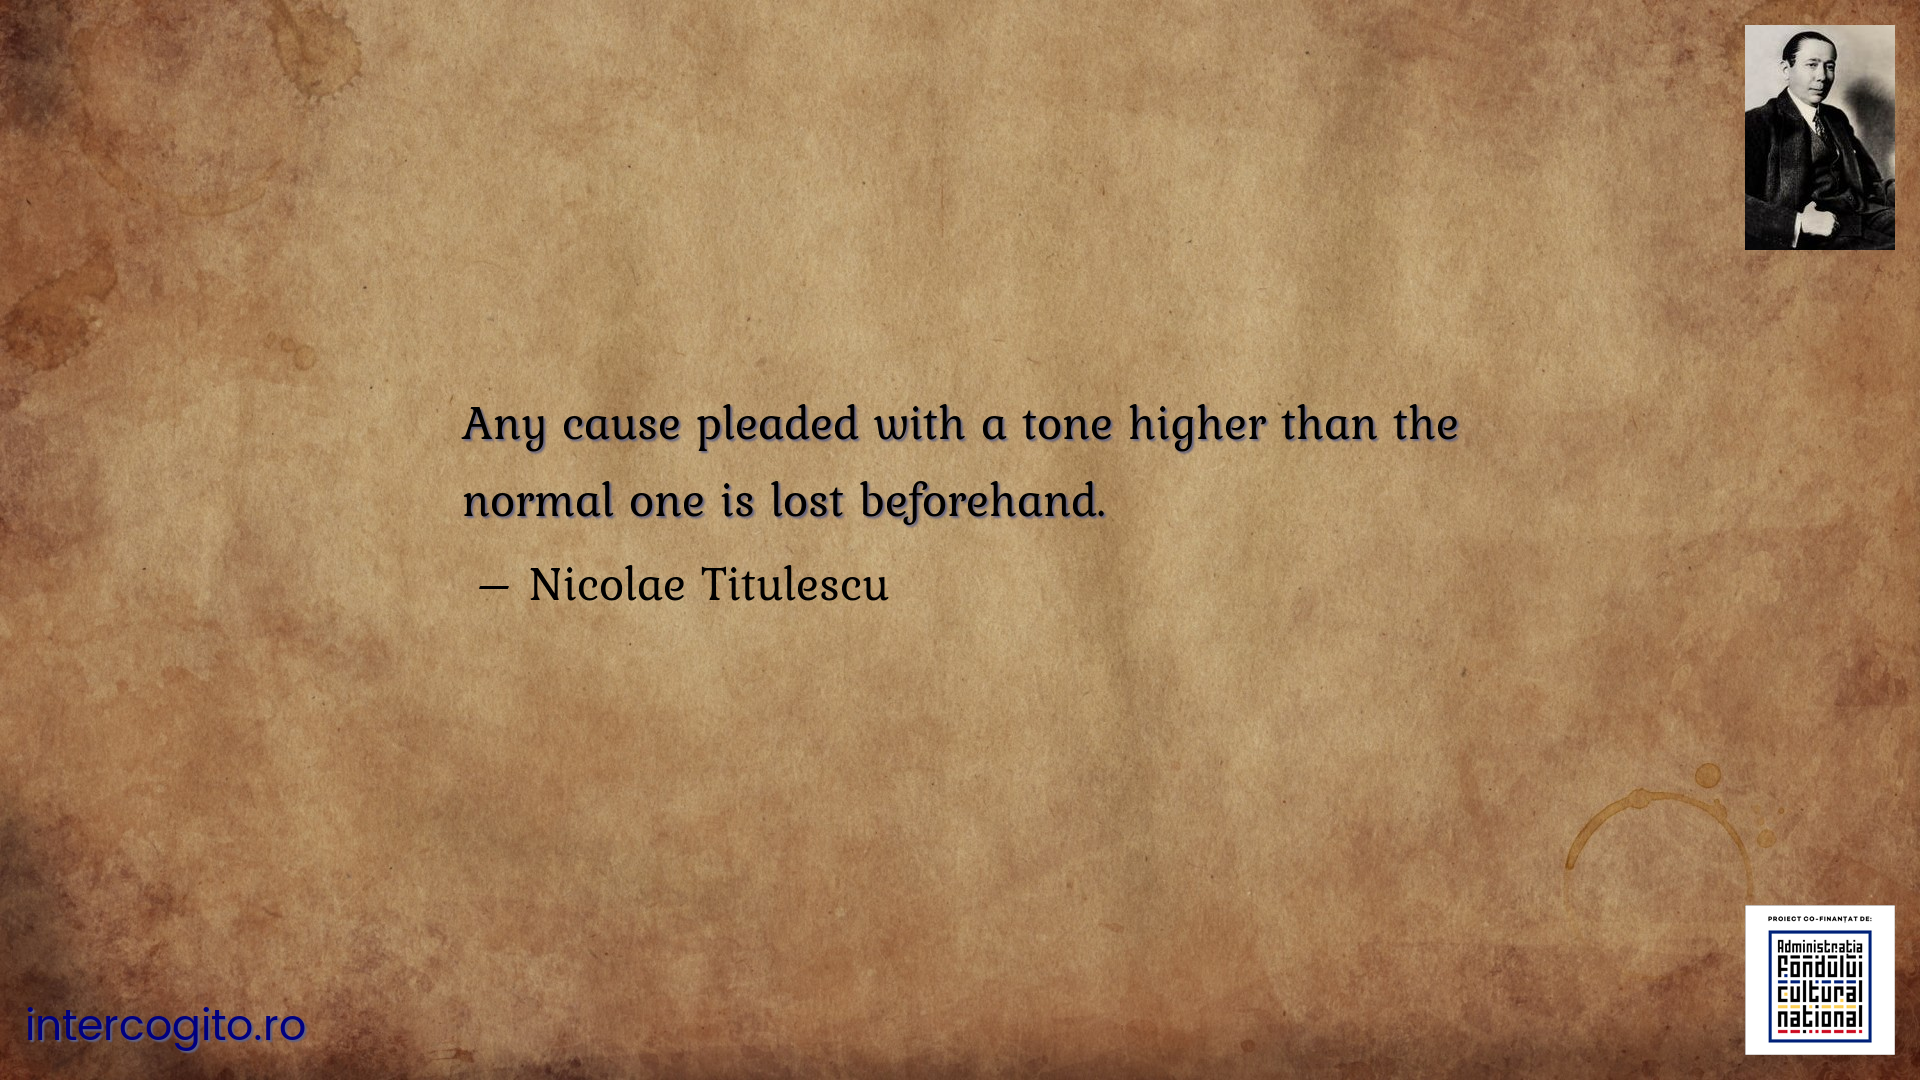 Any cause pleaded with a tone higher than the normal one is lost beforehand.